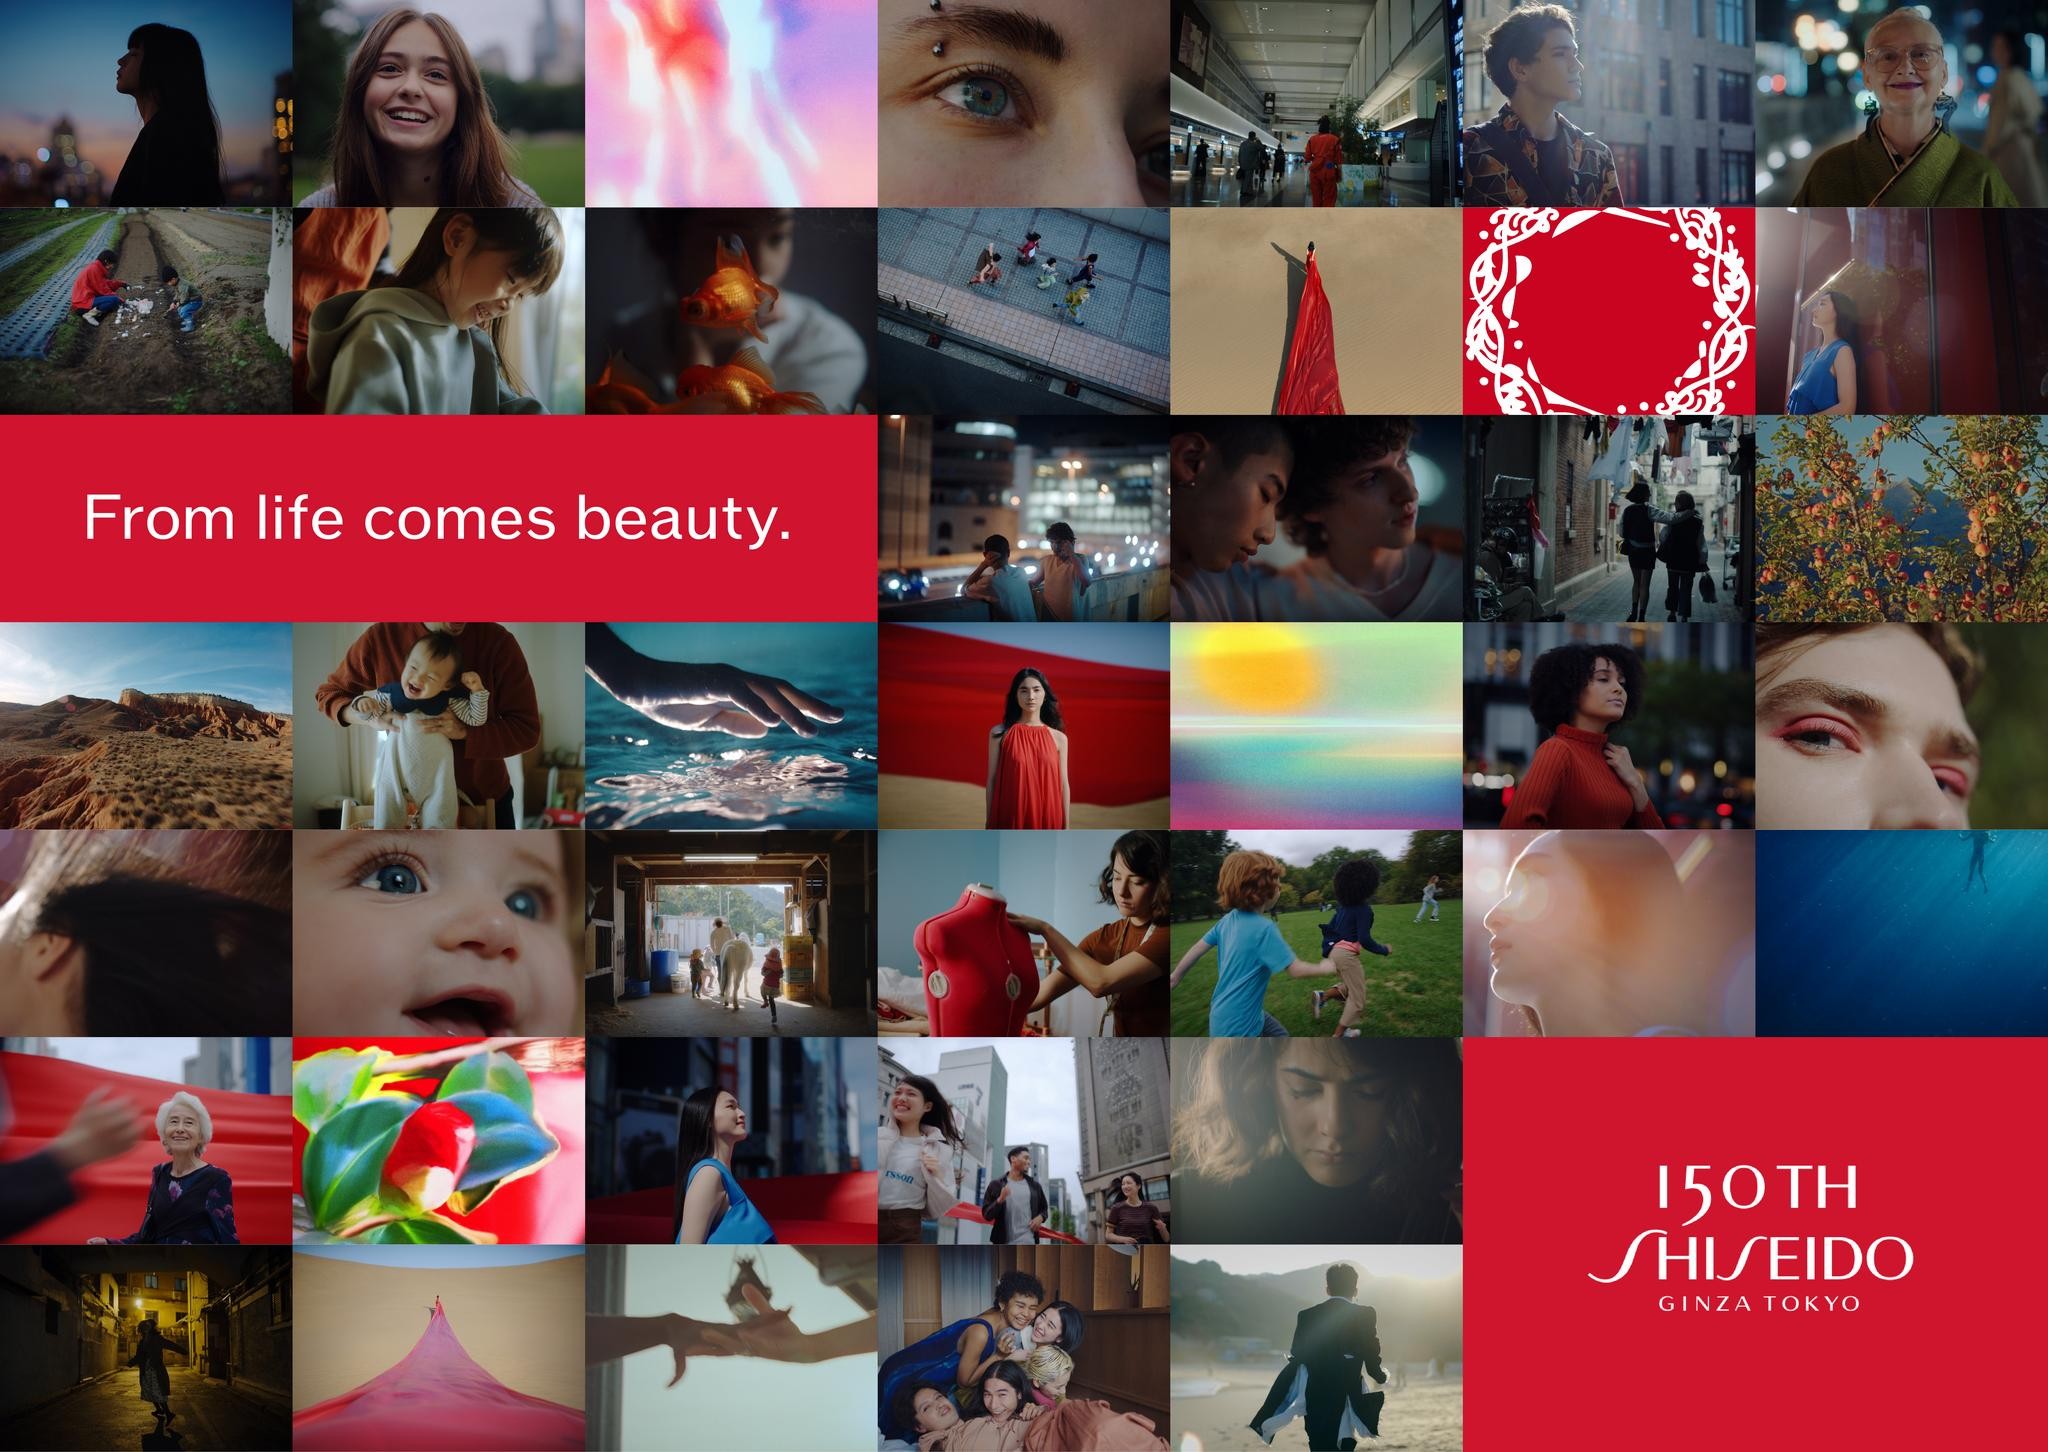 150th Anniversary Message Film "From life comes beauty."